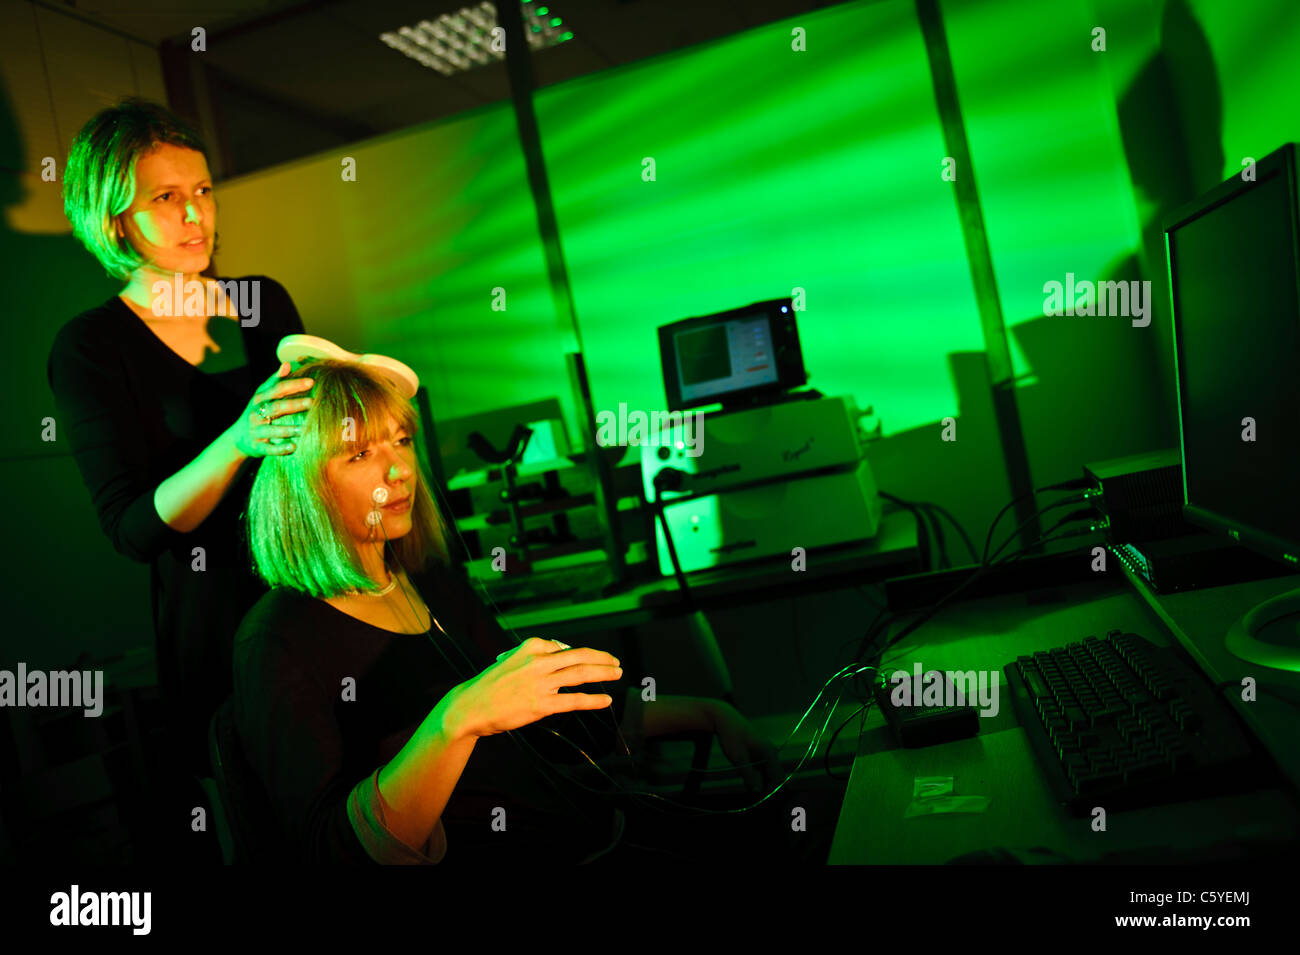 neuroscientist using key shaped paddle to perform transcranial magnetic stimulation TMS on subject sitting in lab Lit green Stock Photo